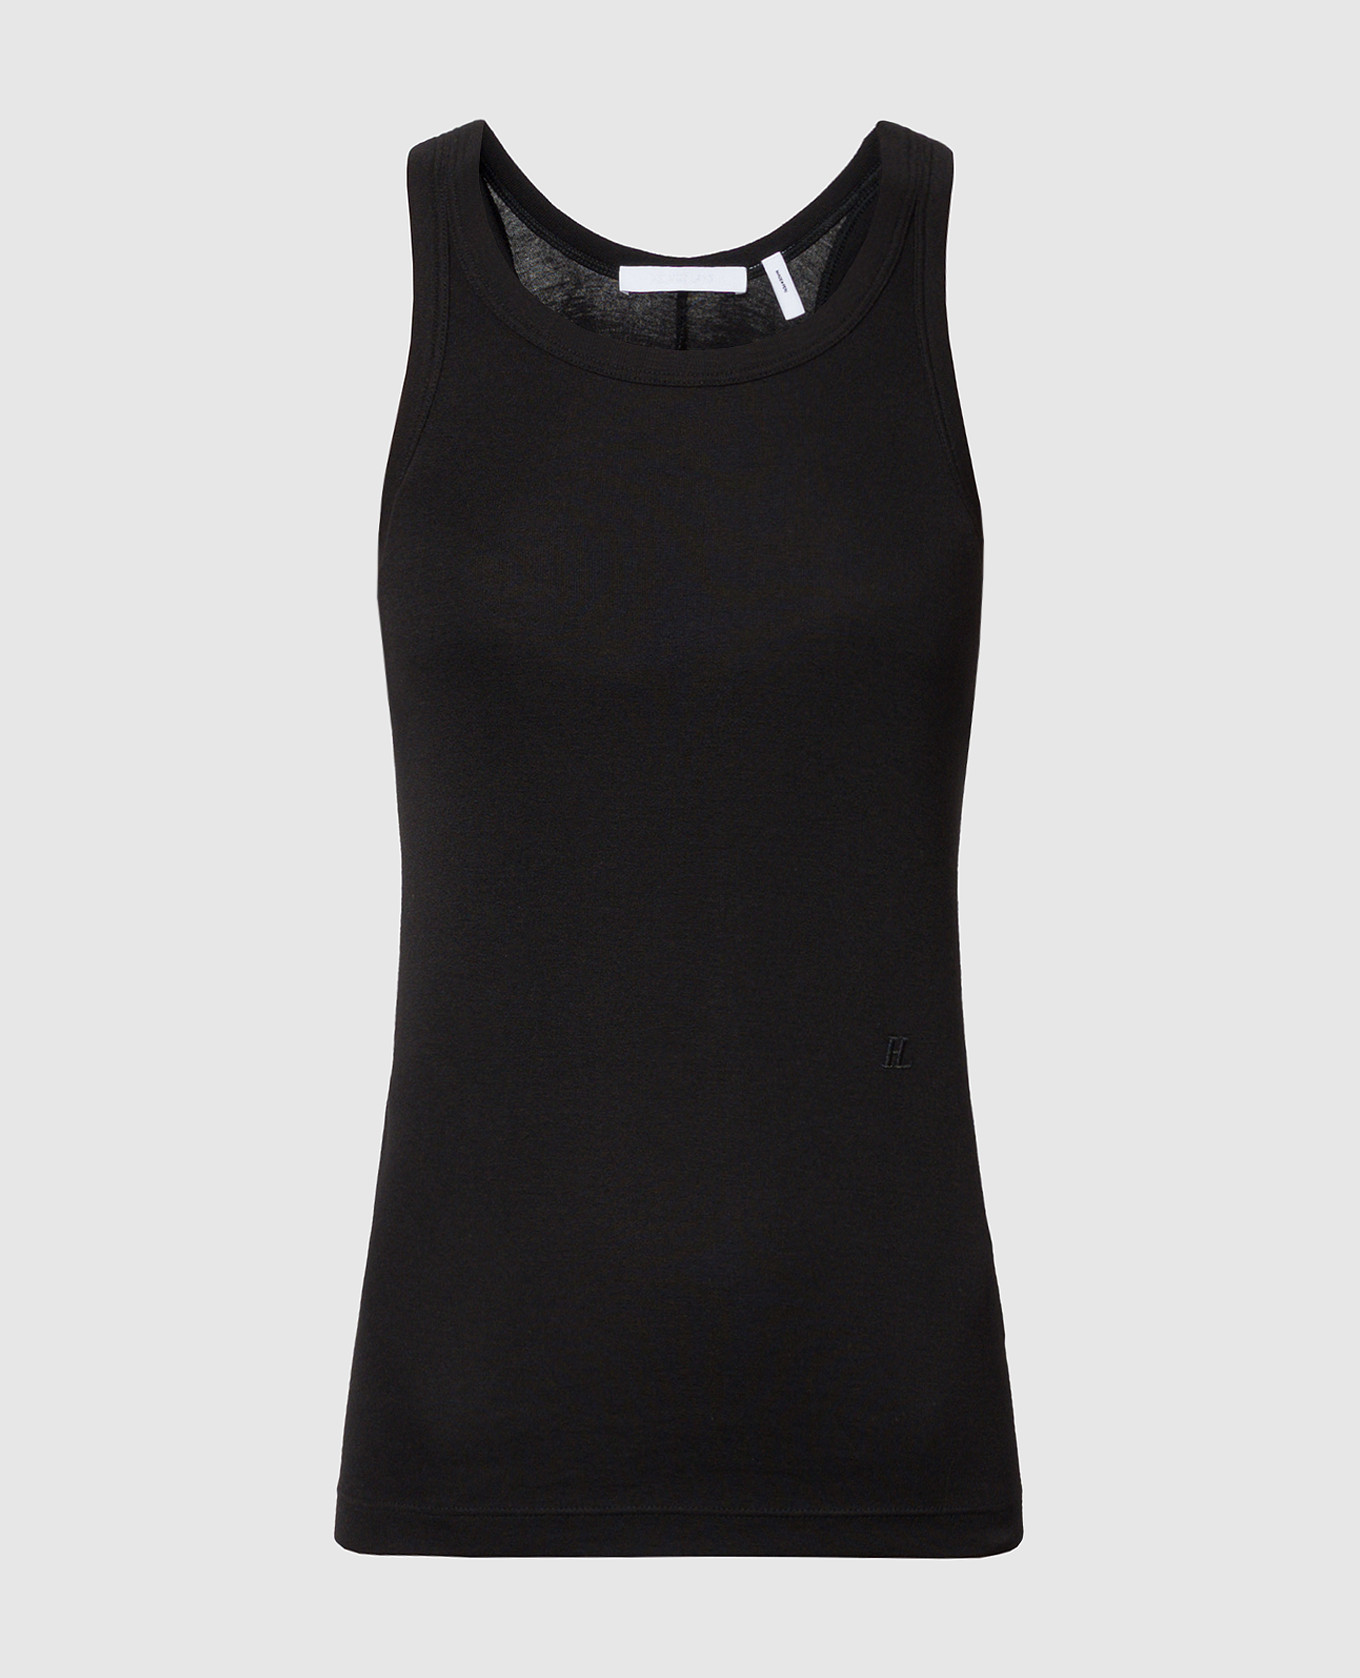 Black top with monogram logo embroidery